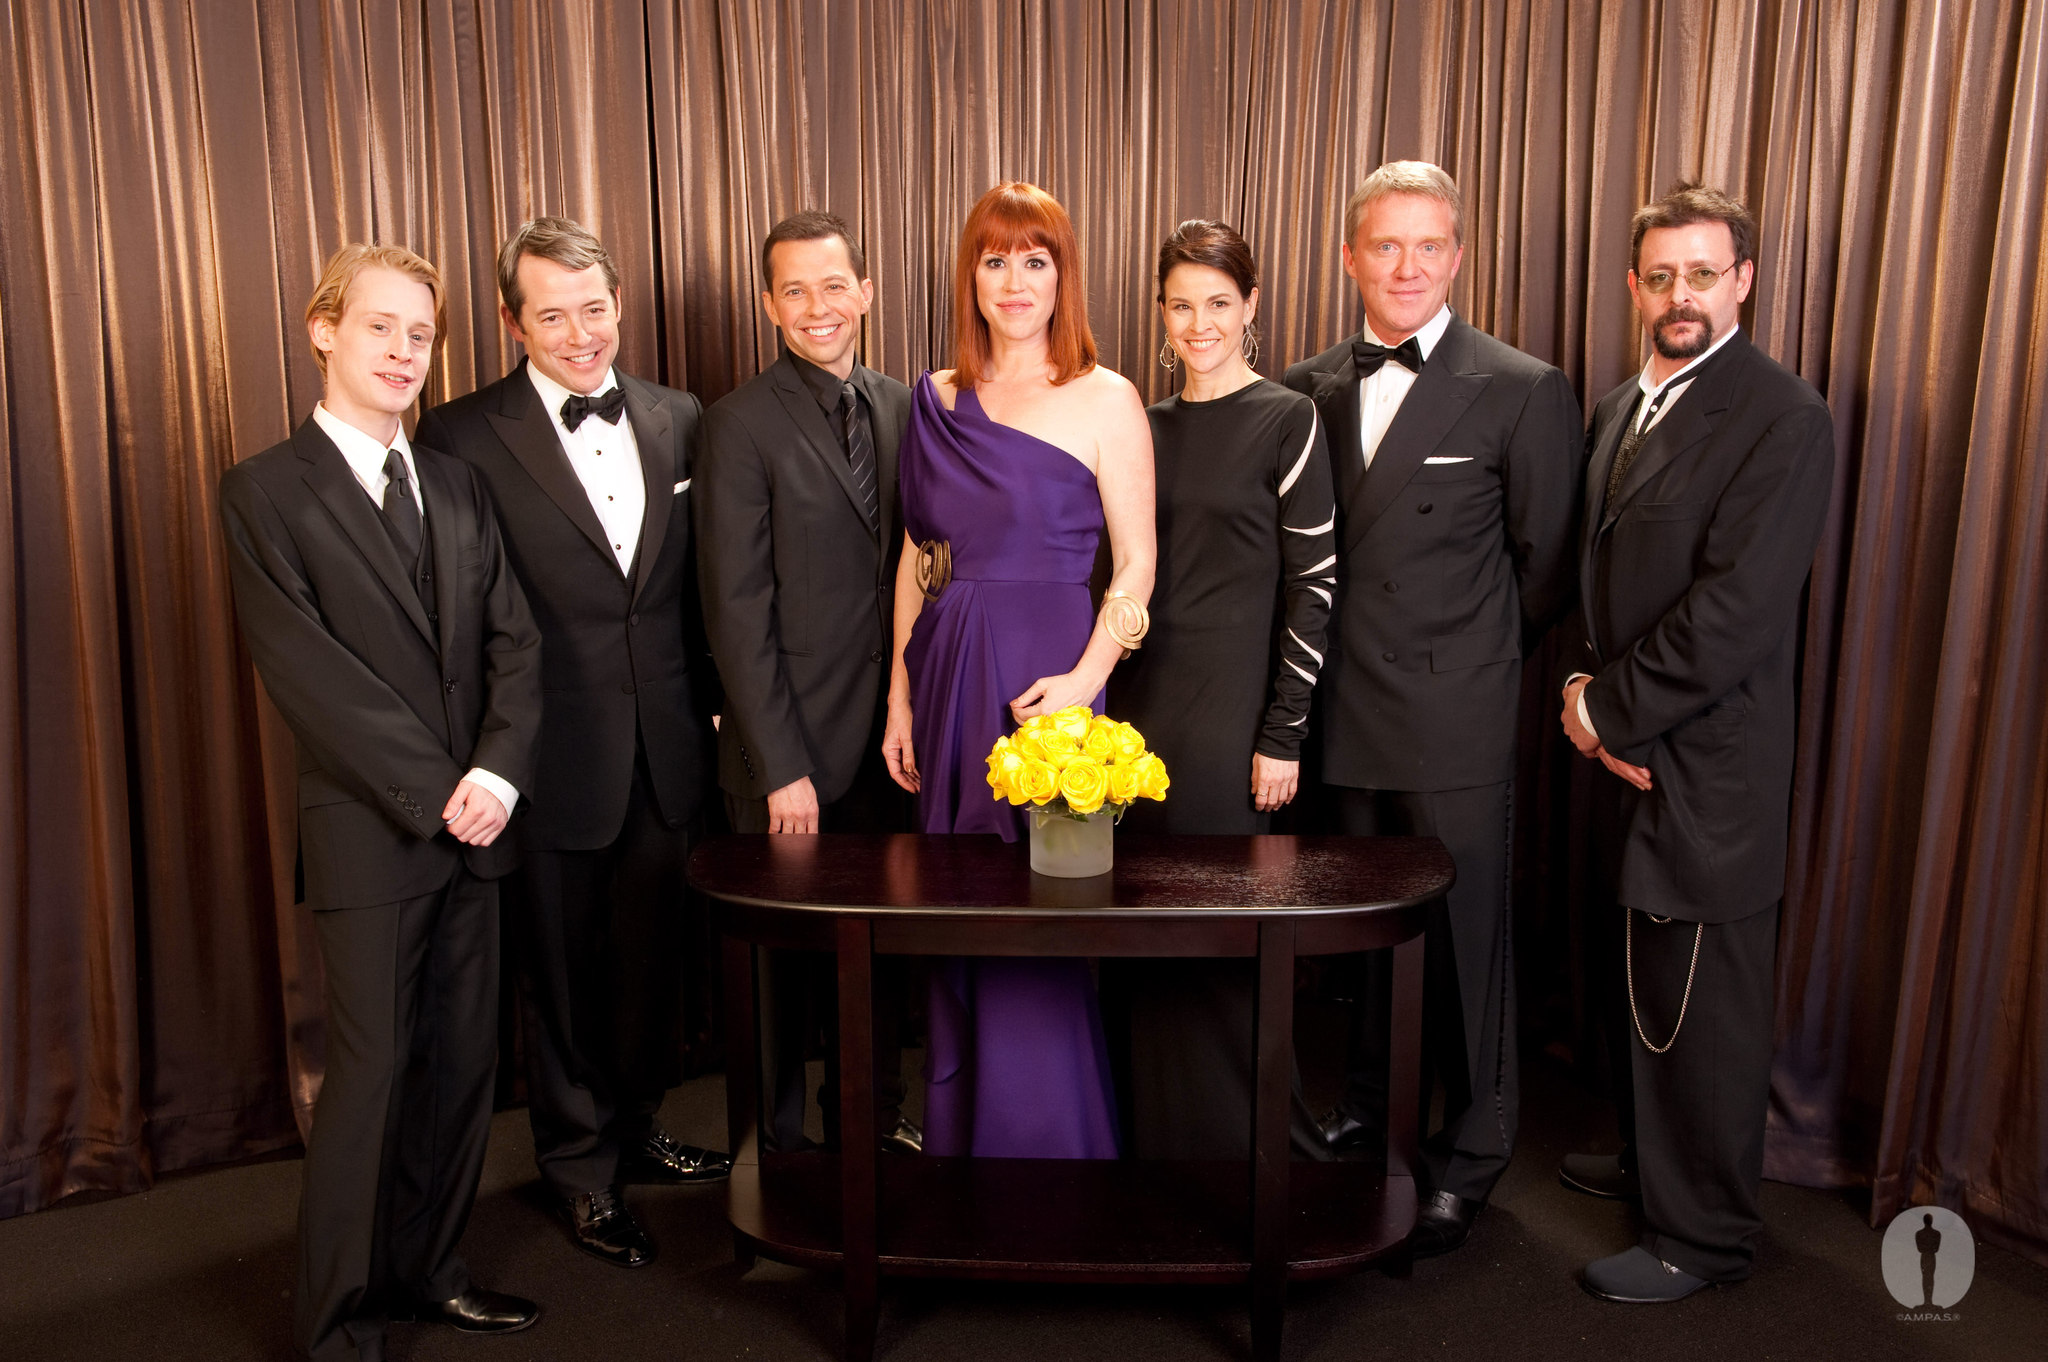 Matthew Broderick, Molly Ringwald, Macaulay Culkin, Judd Nelson, Ally Sheedy, Jon Cryer and Anthony Michael Hall at event of The 82nd Annual Academy Awards (2010)